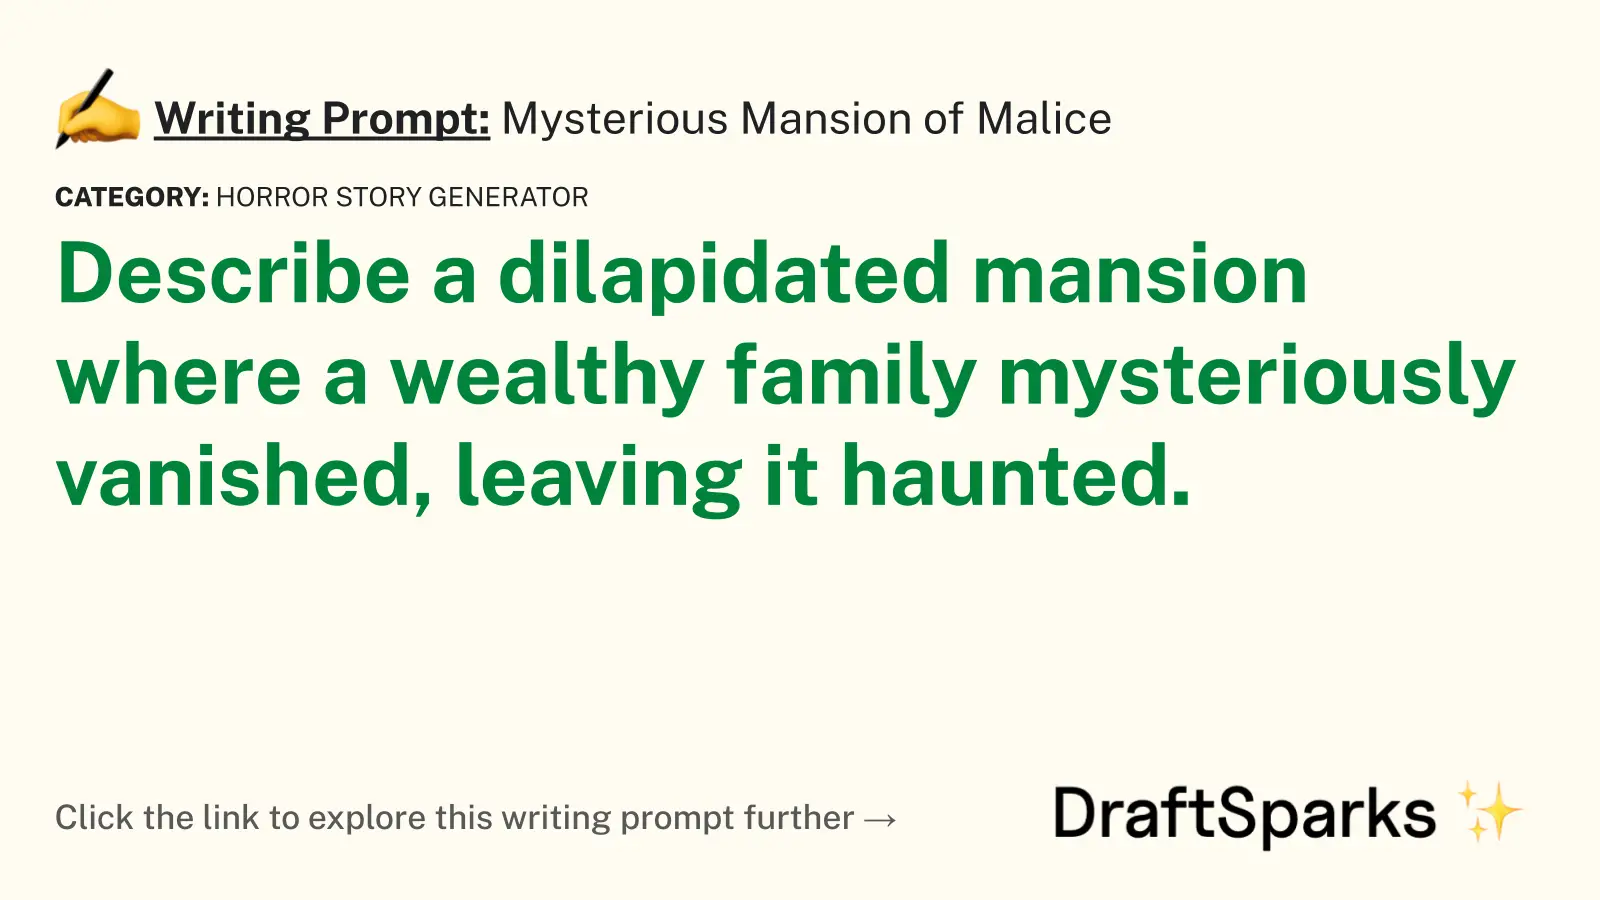 Mysterious Mansion of Malice